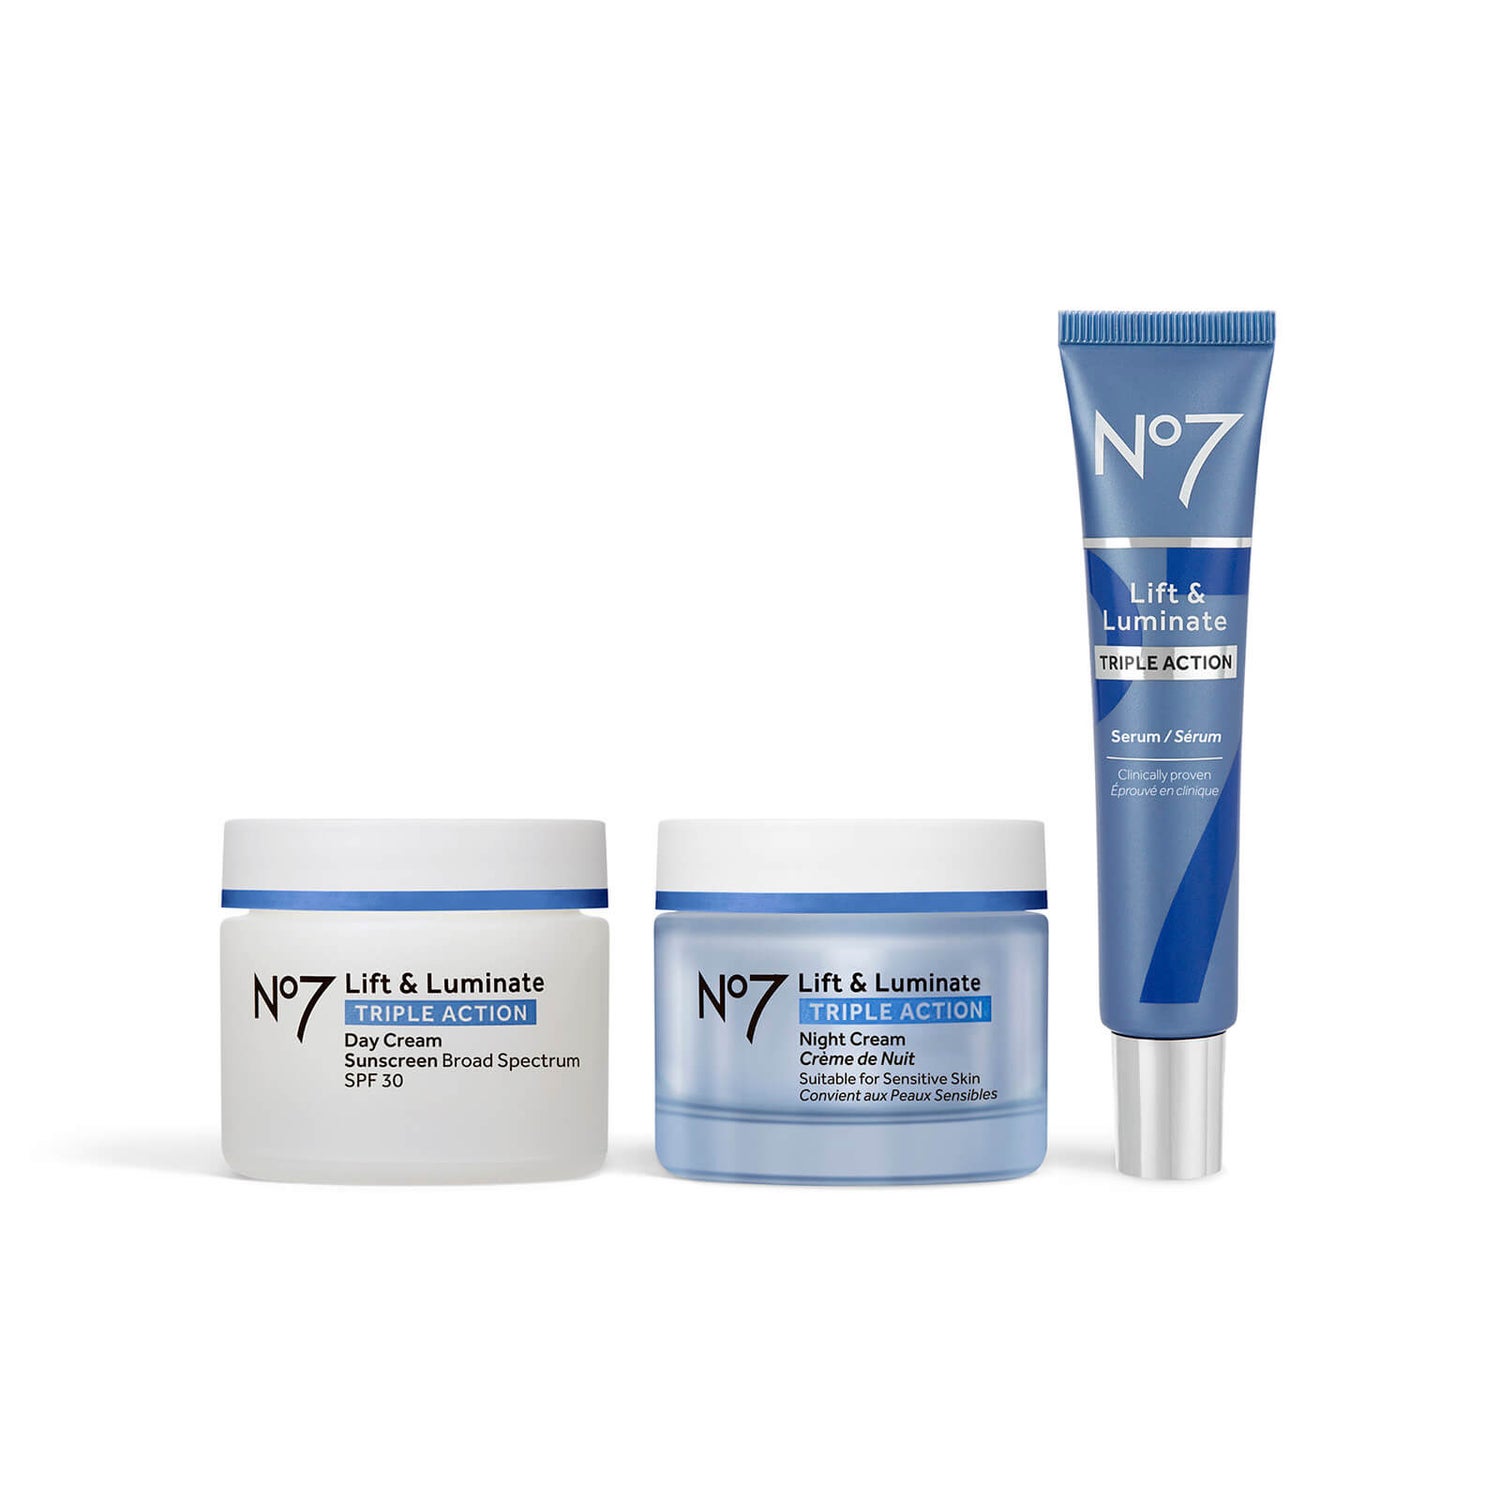 No7 Lift and Luminate Triple Action Skincare System 1.6oz (Worth $88)